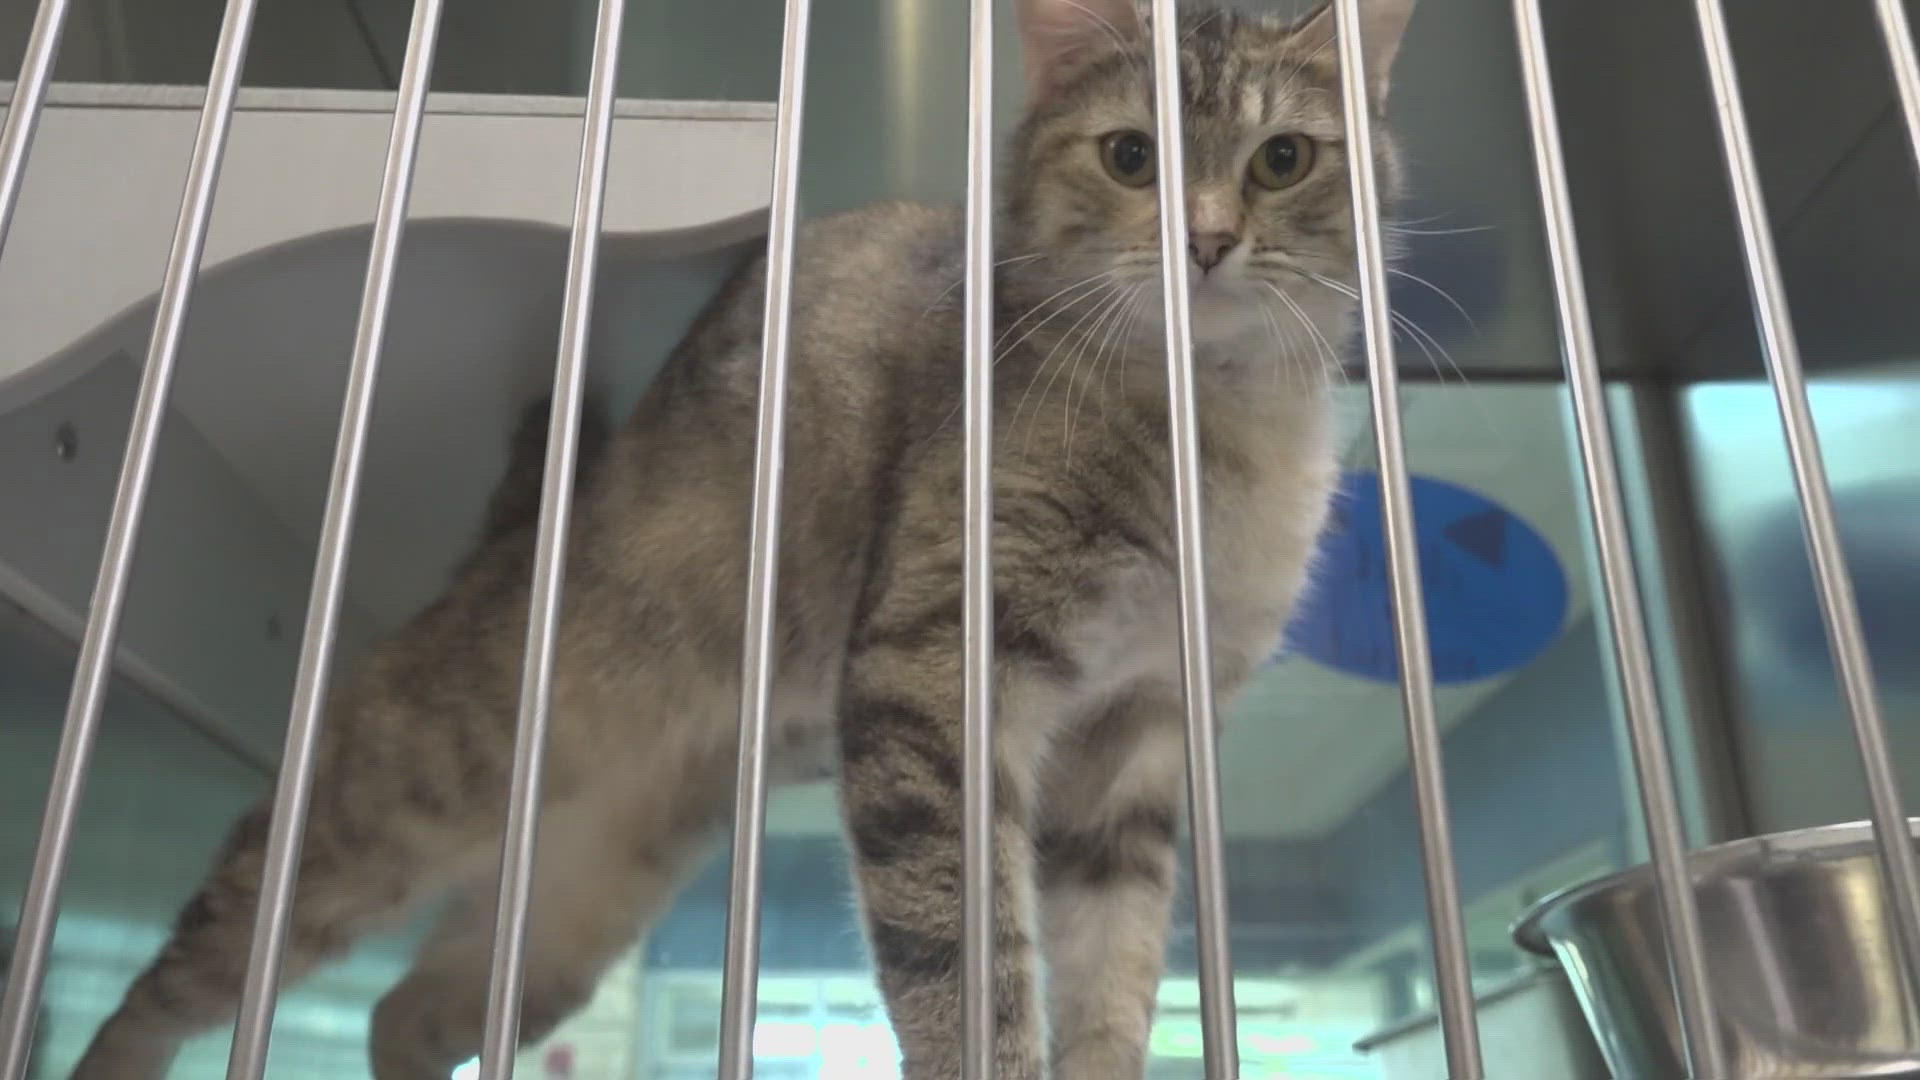 Midland Animal Services has more cats than usual due to breeding season.